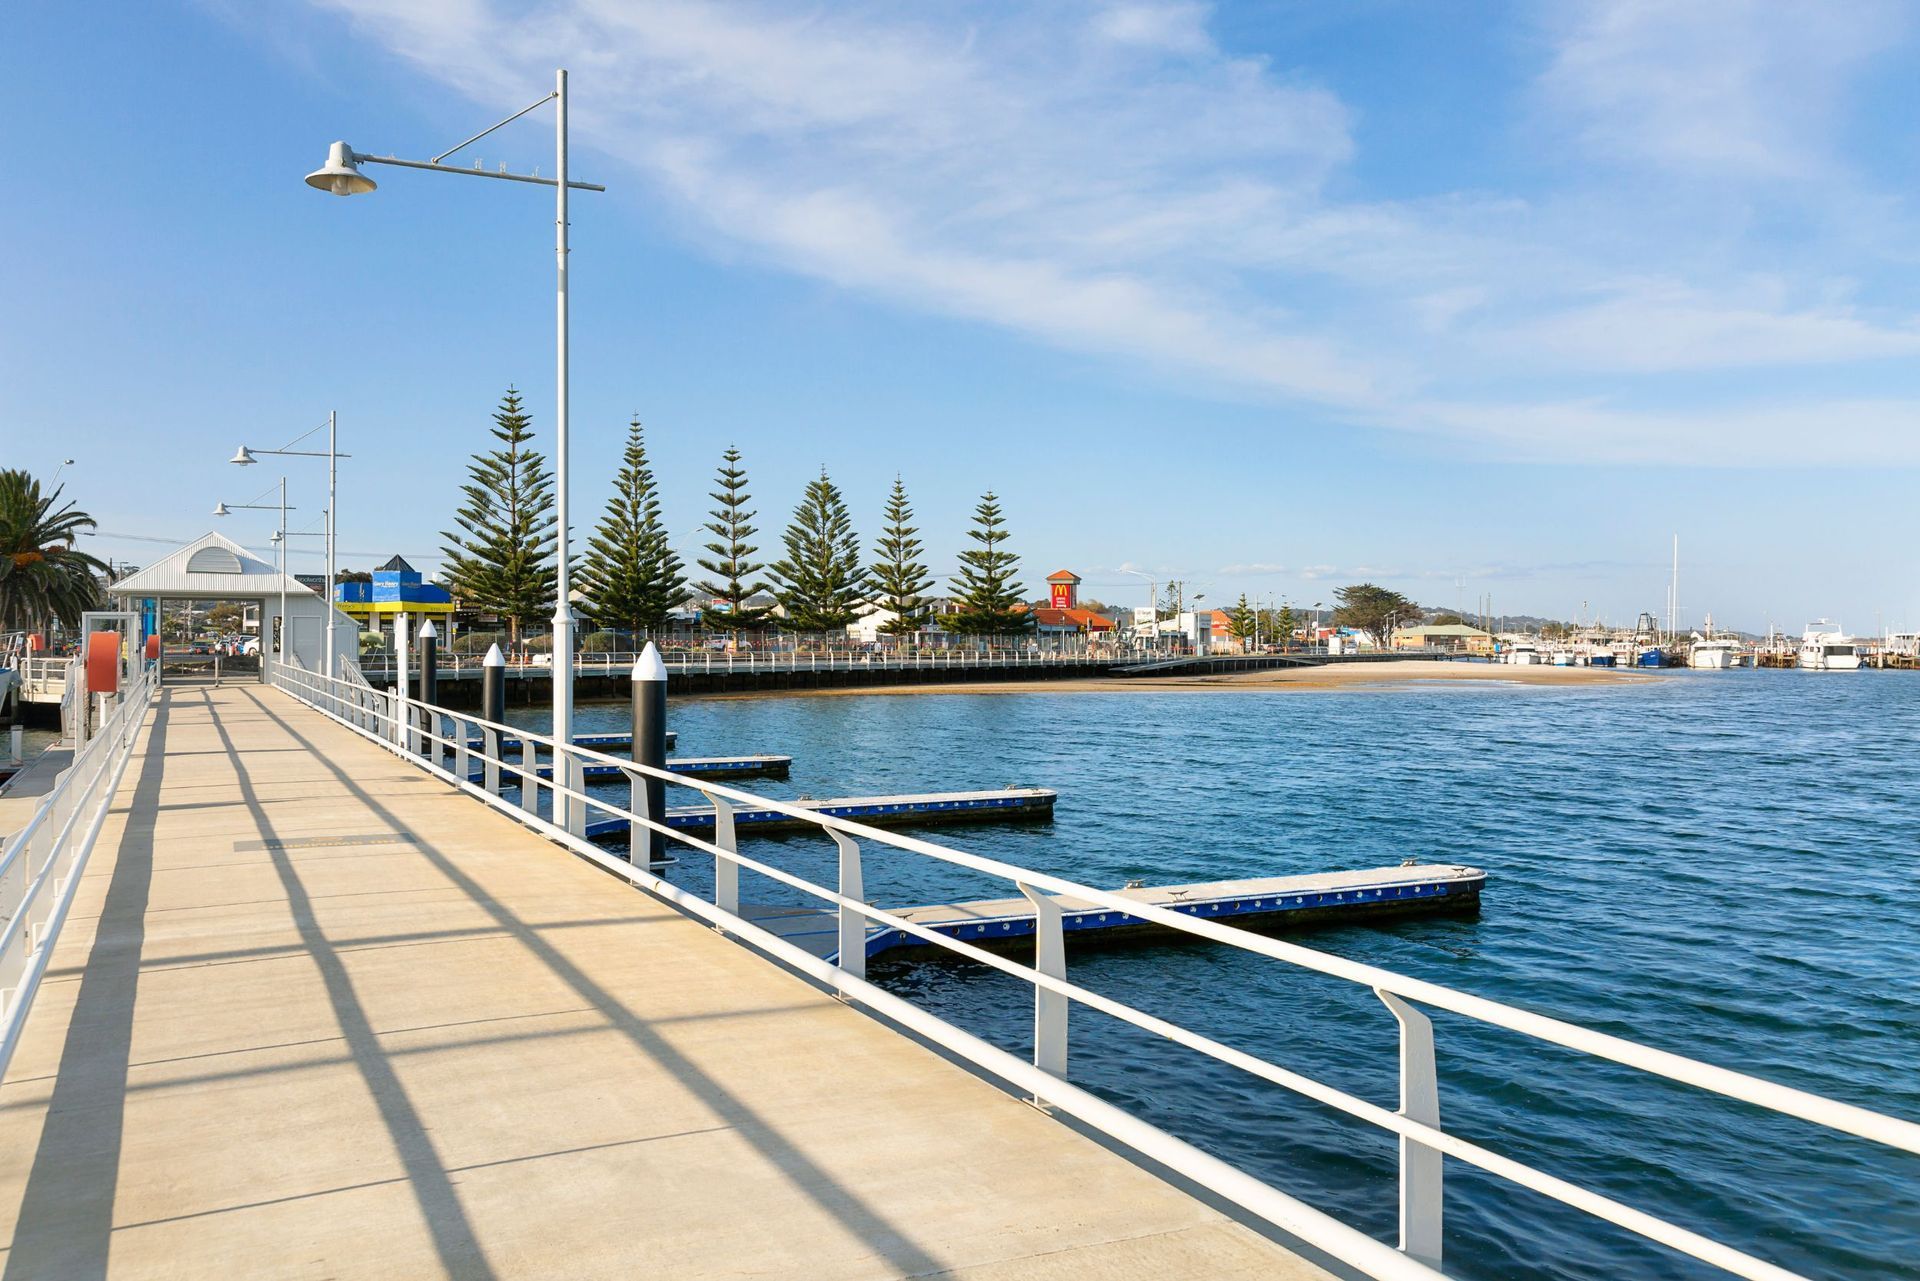 A pier with a white railing overlooking a body of water.